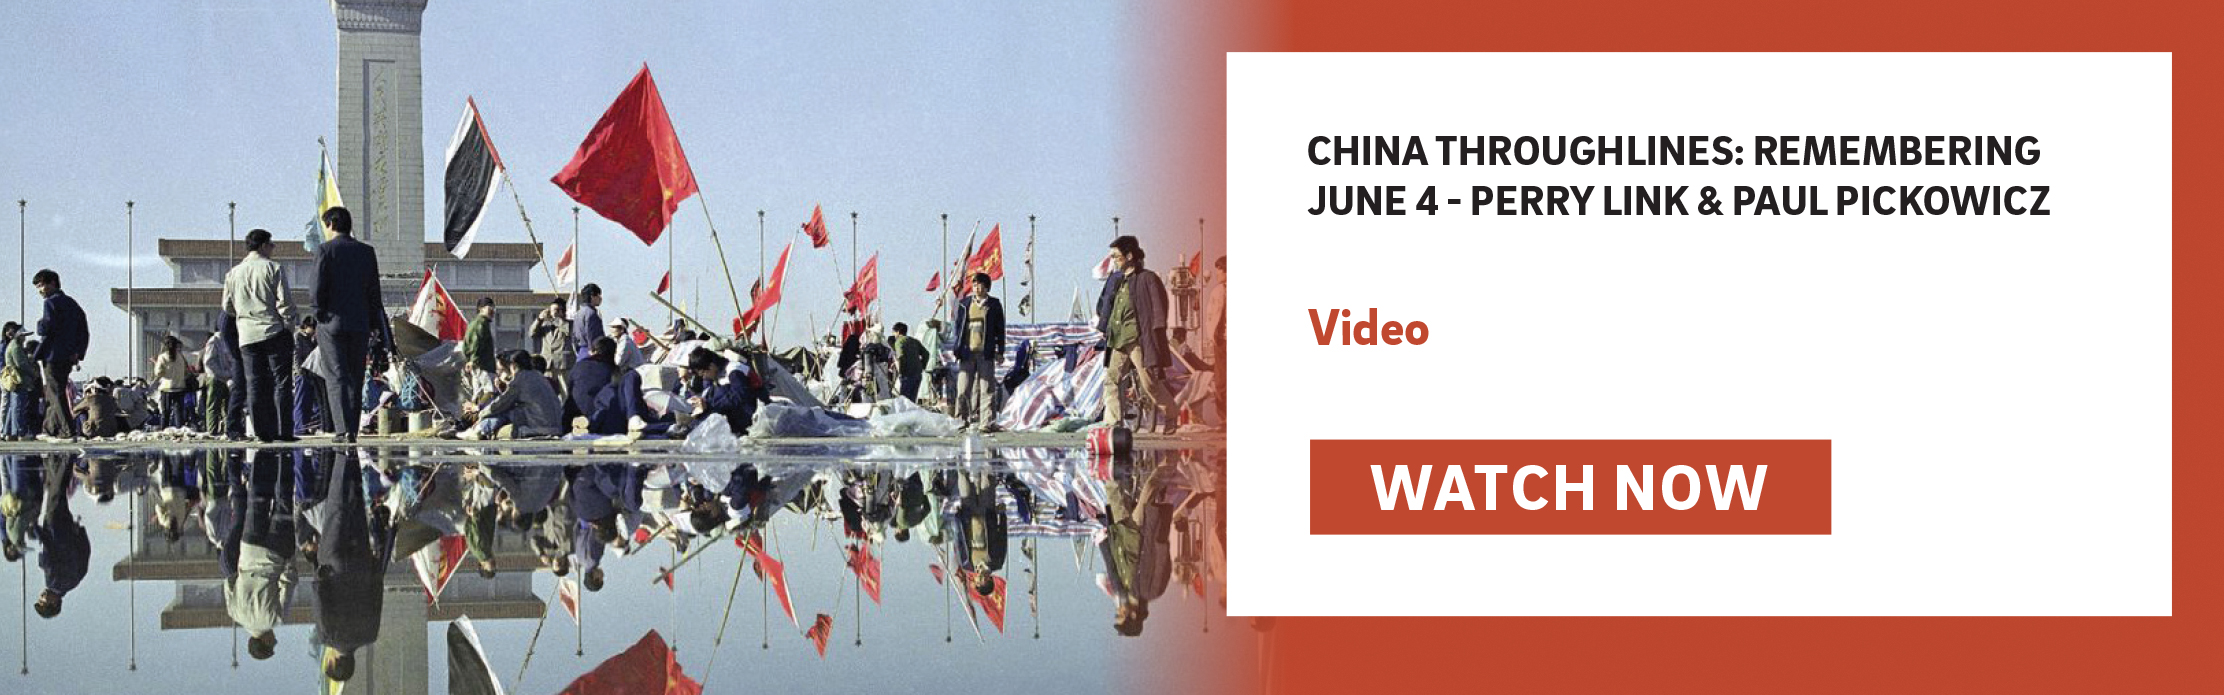 China Throughlines: Remembering June 4 - Perry Link & Paul Pickowicz